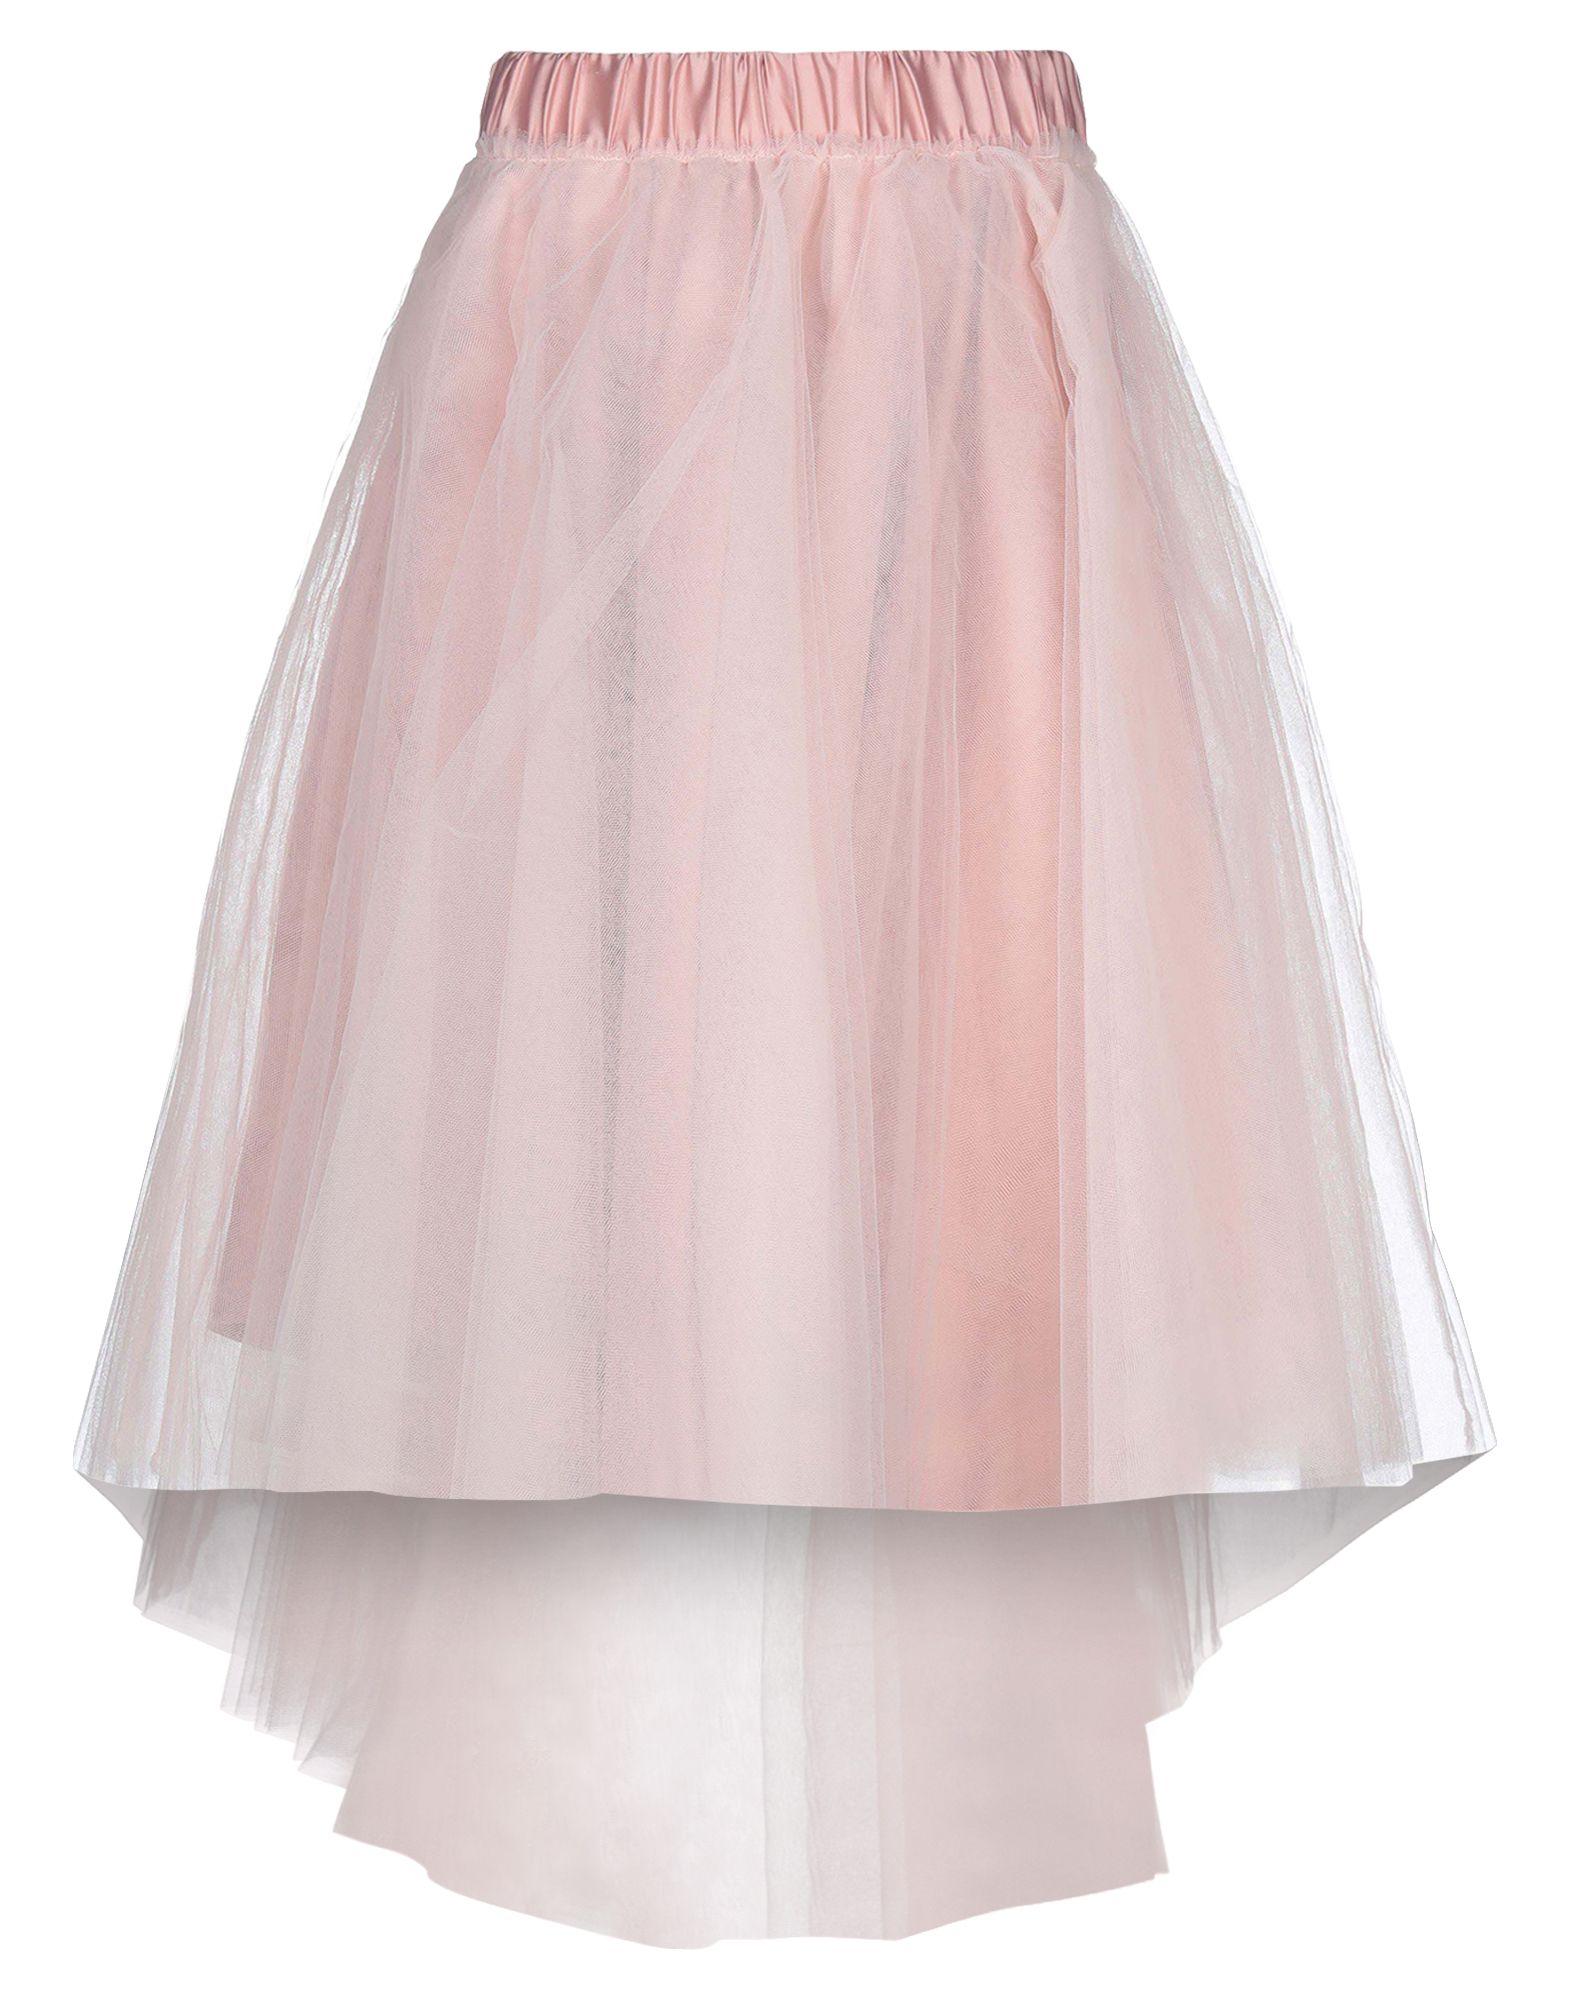 tulle, solid color, no appliqués, no pockets, multi-layered interior, stretch, flared style.